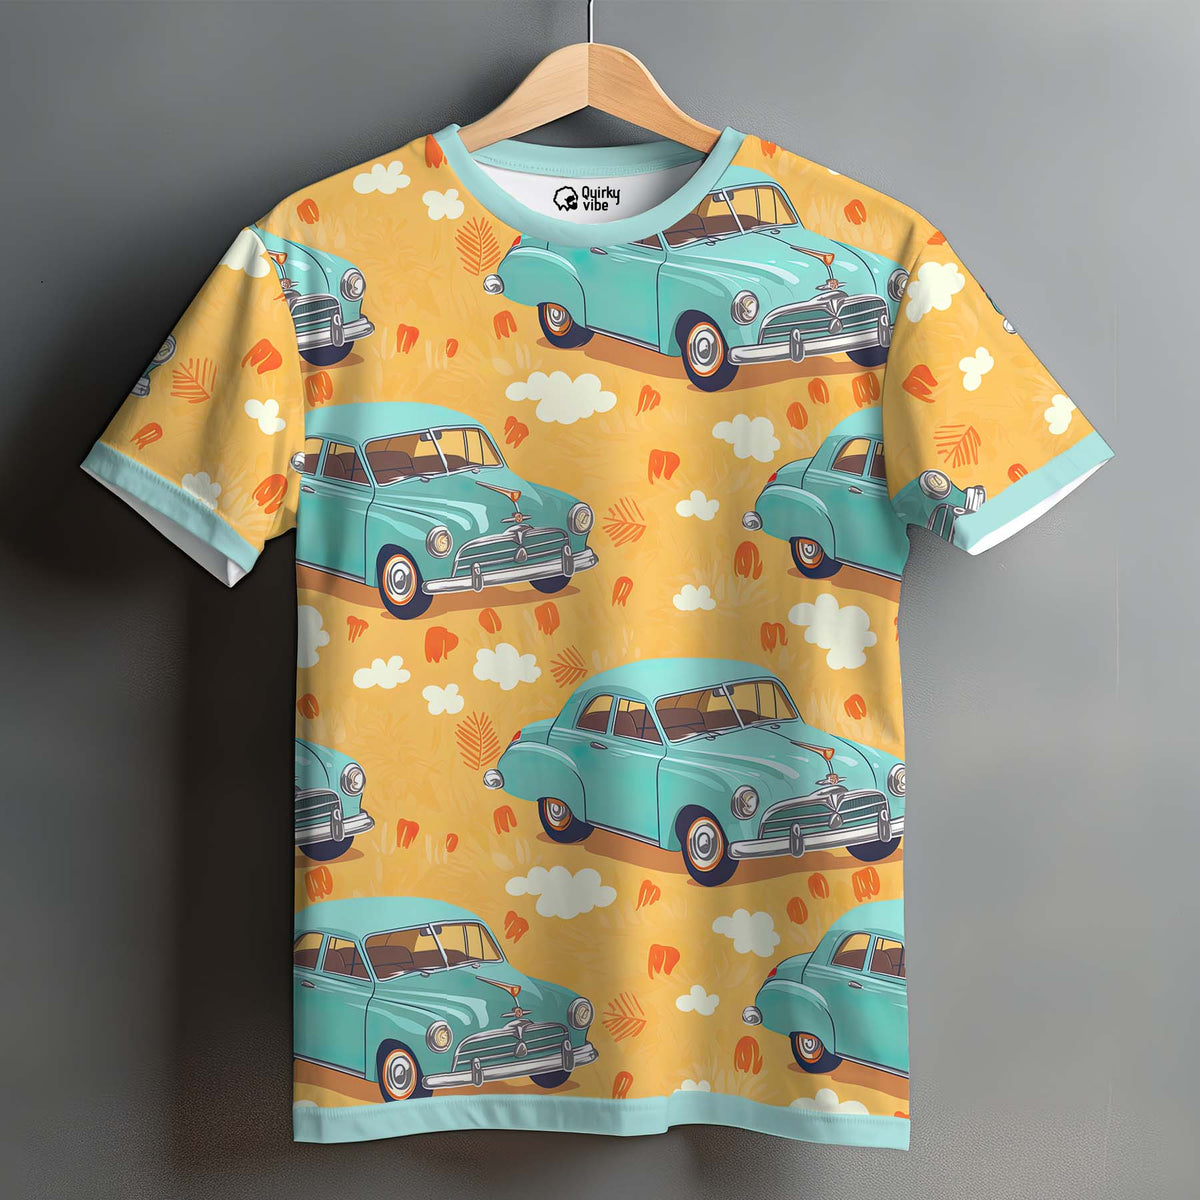 Cars | Oversize T-Shirt | Quirky Vibe Quirky Vibe India